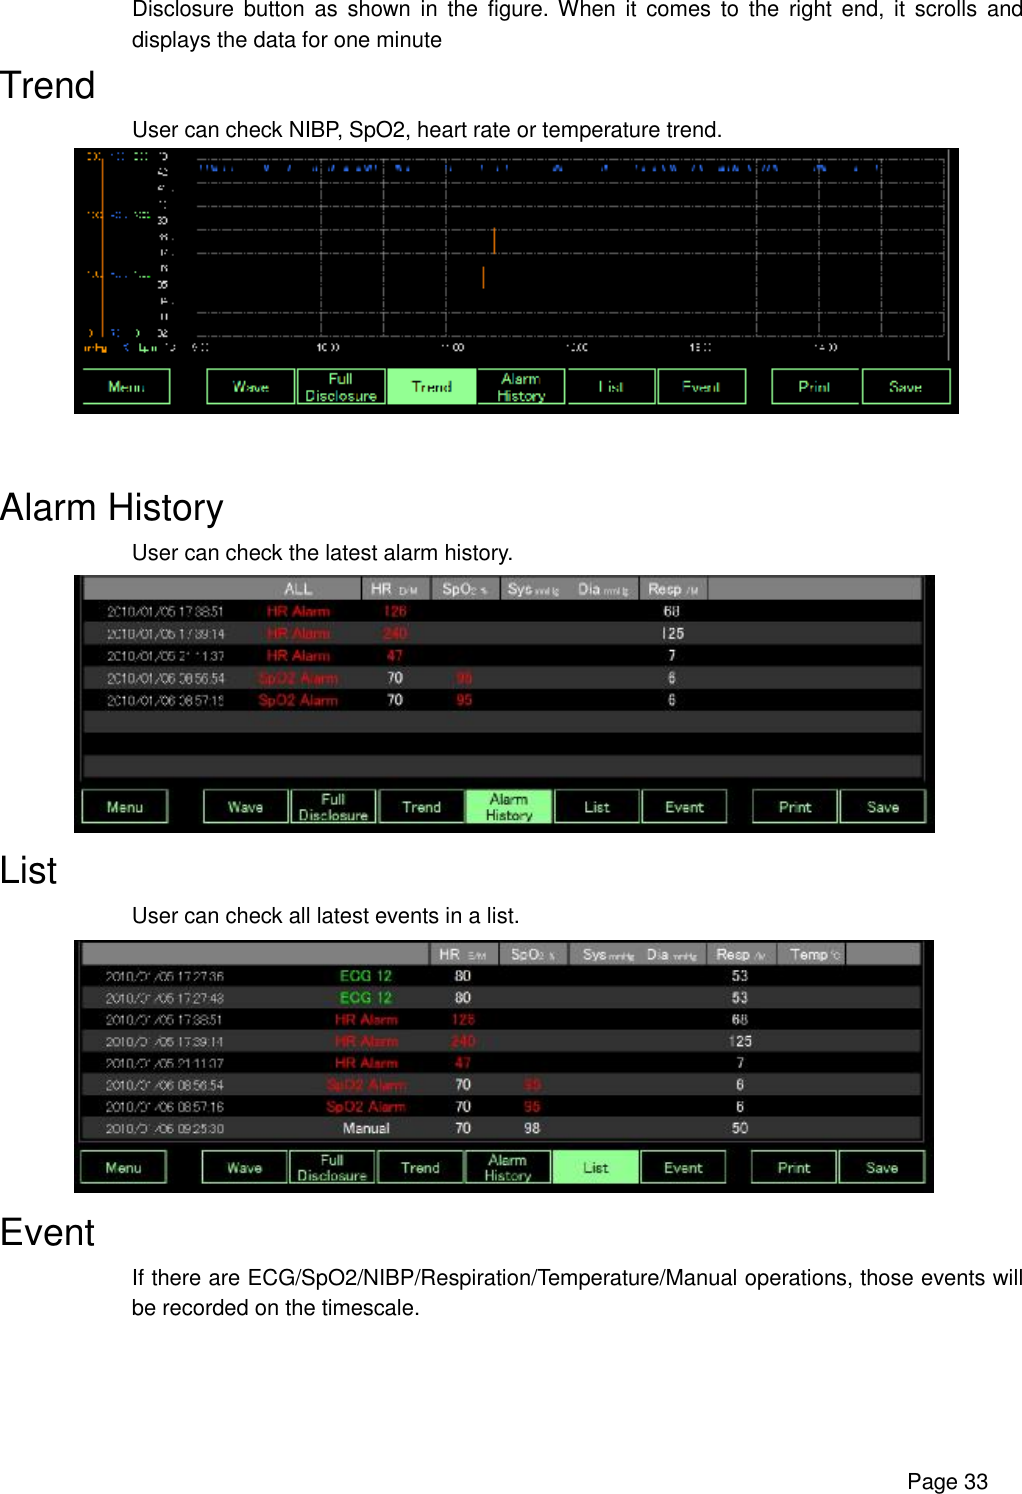      Page 33 Disclosure button as shown in the figure. When it comes to the right end, it scrolls and displays the data for one minute Trend   User can check NIBP, SpO2, heart rate or temperature trend.    Alarm History User can check the latest alarm history.  List User can check all latest events in a list.  Event If there are ECG/SpO2/NIBP/Respiration/Temperature/Manual operations, those events will be recorded on the timescale. 